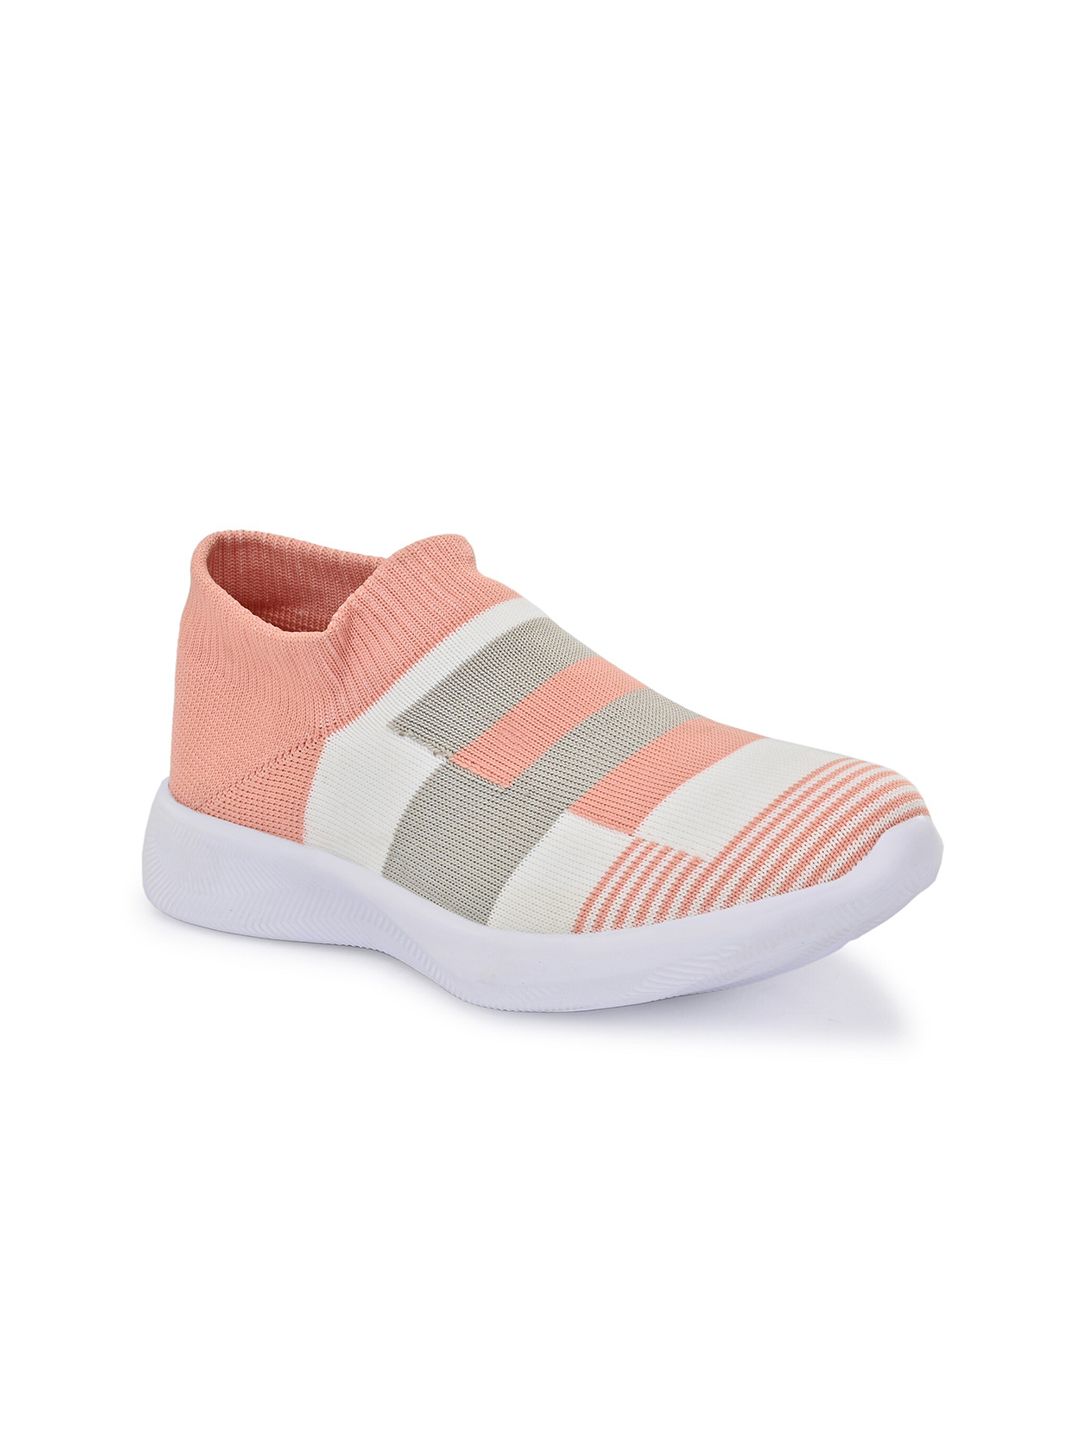 TimberWood Women Peach-Coloured Textile Walking Shoes Price in India